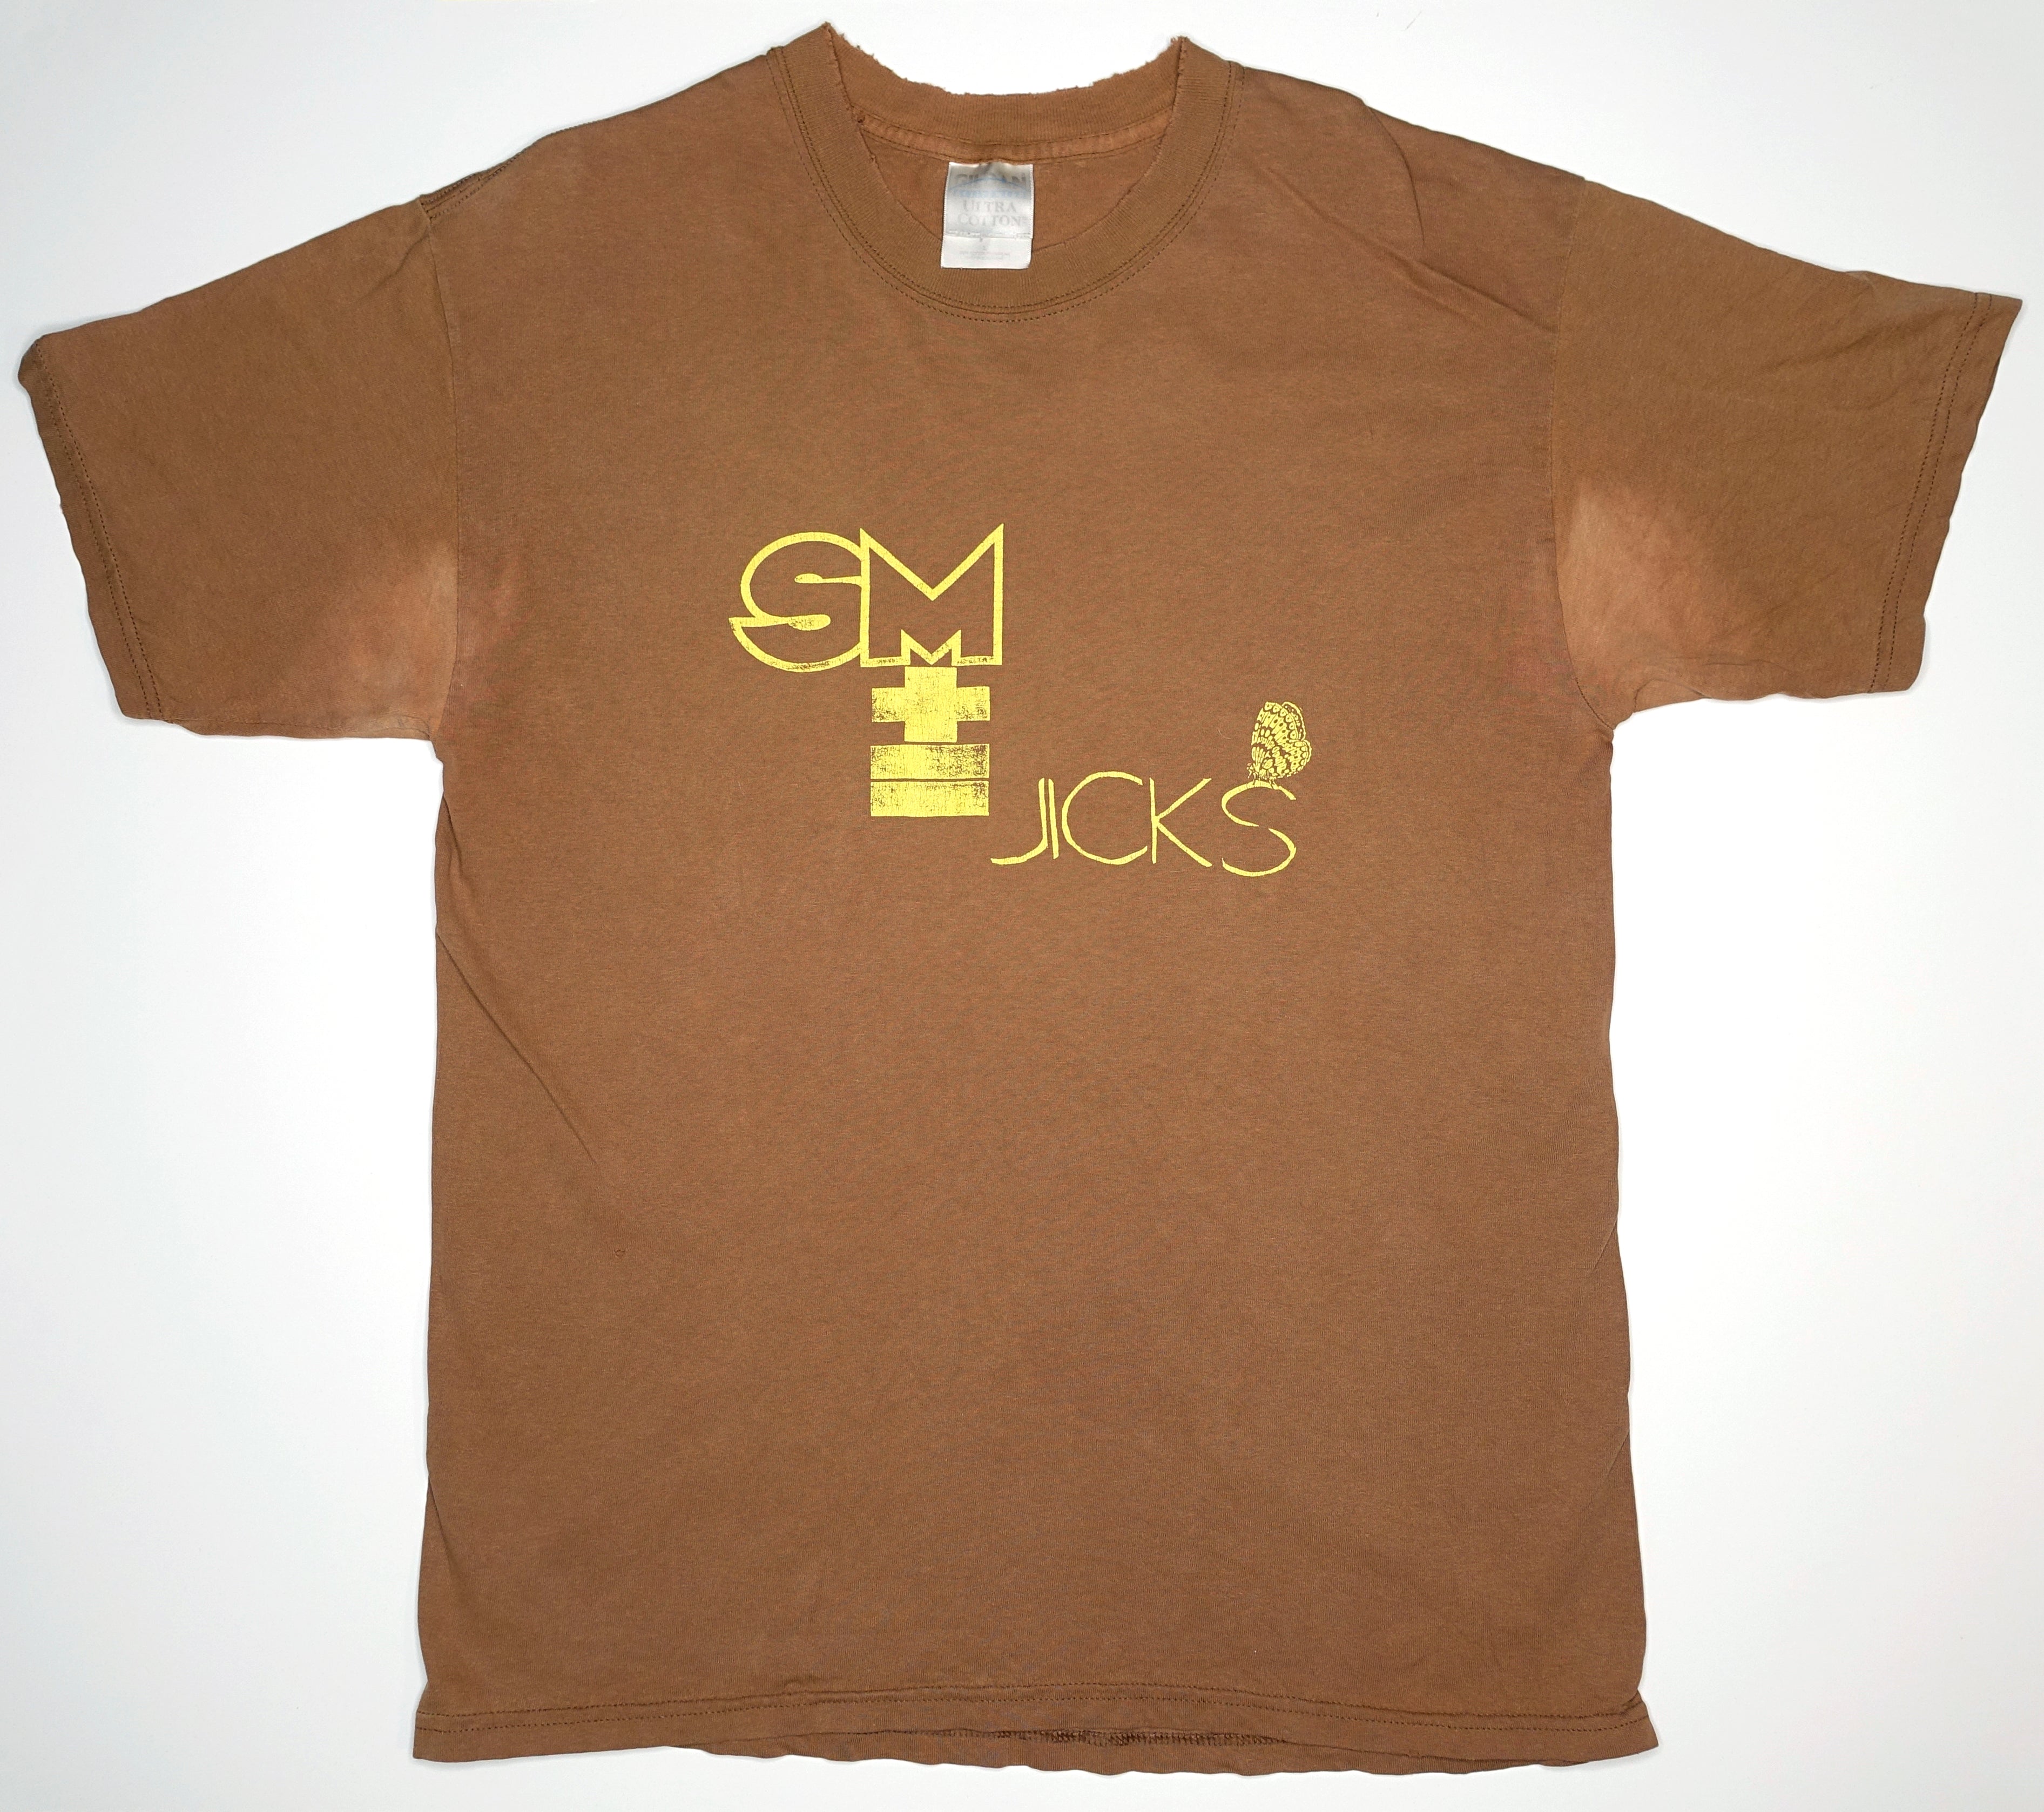 Stephen Malkmus and the Jicks - Butterfly Tour Shirt Size Large